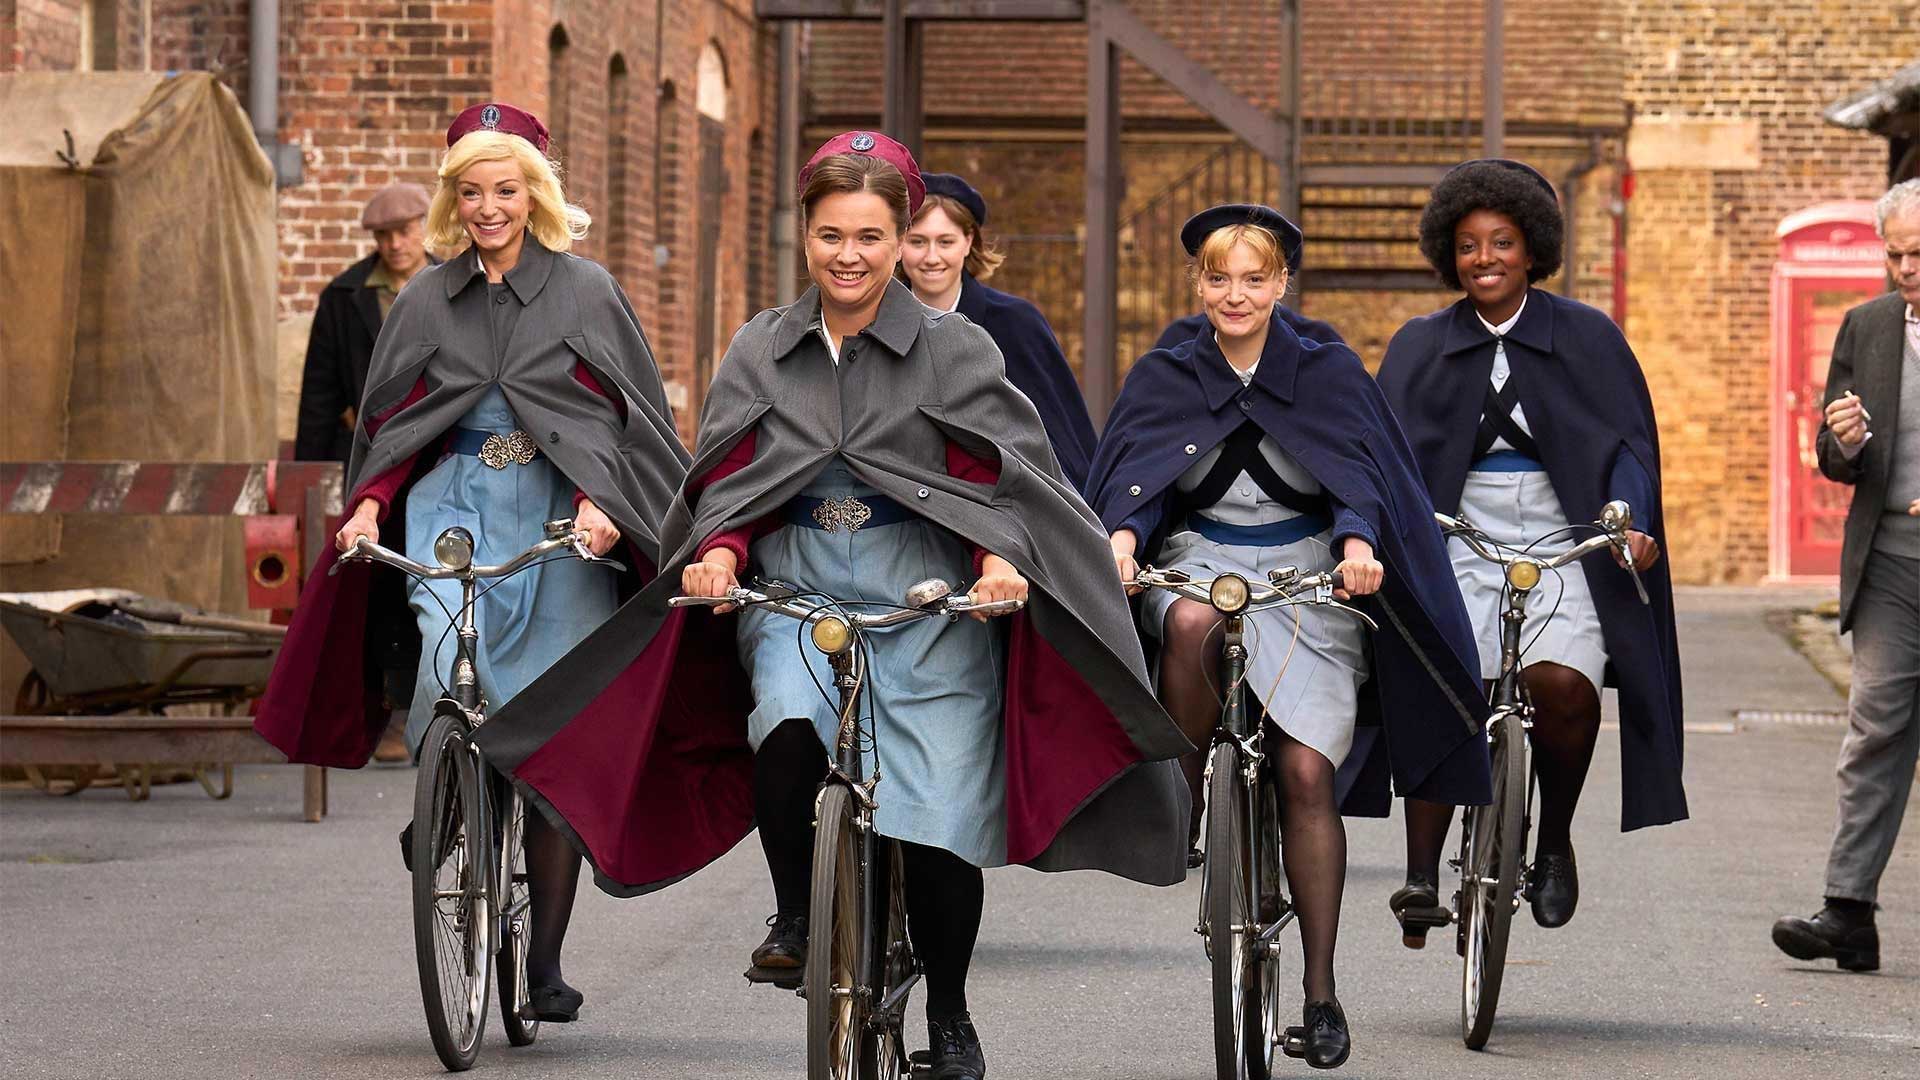 Call the Midwife s13 bicycles hero